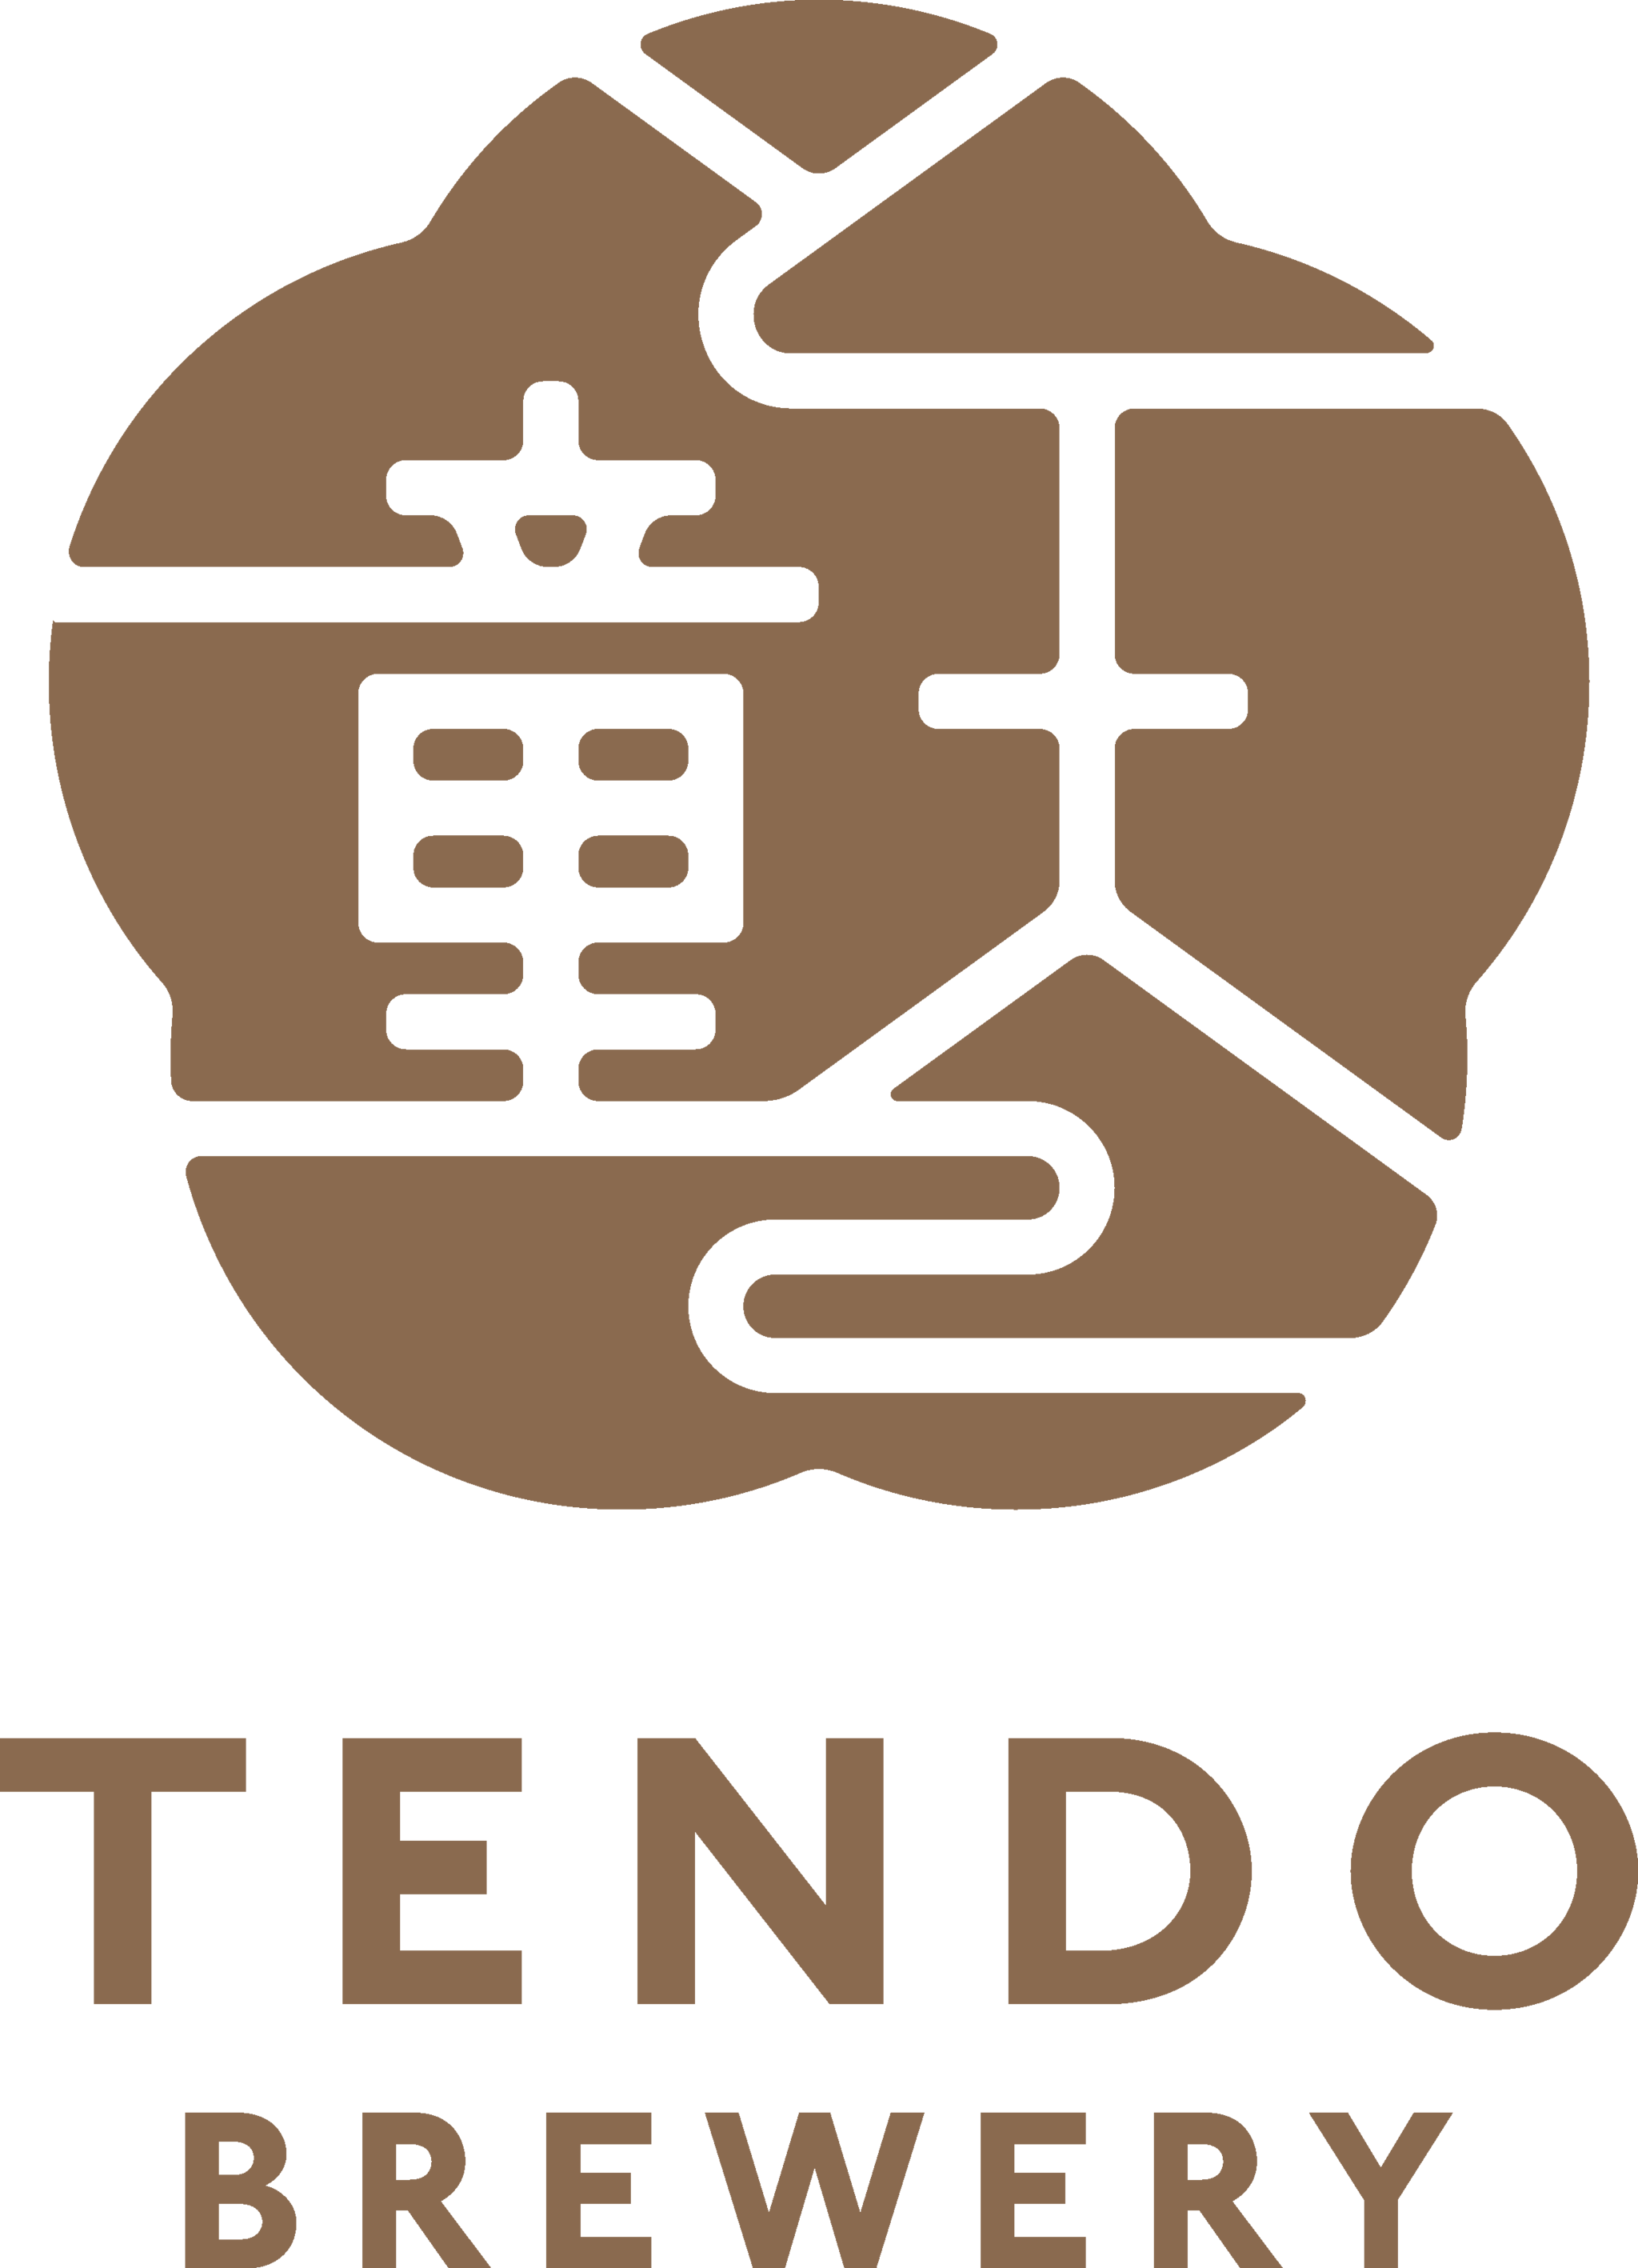 TENDO BREWERY